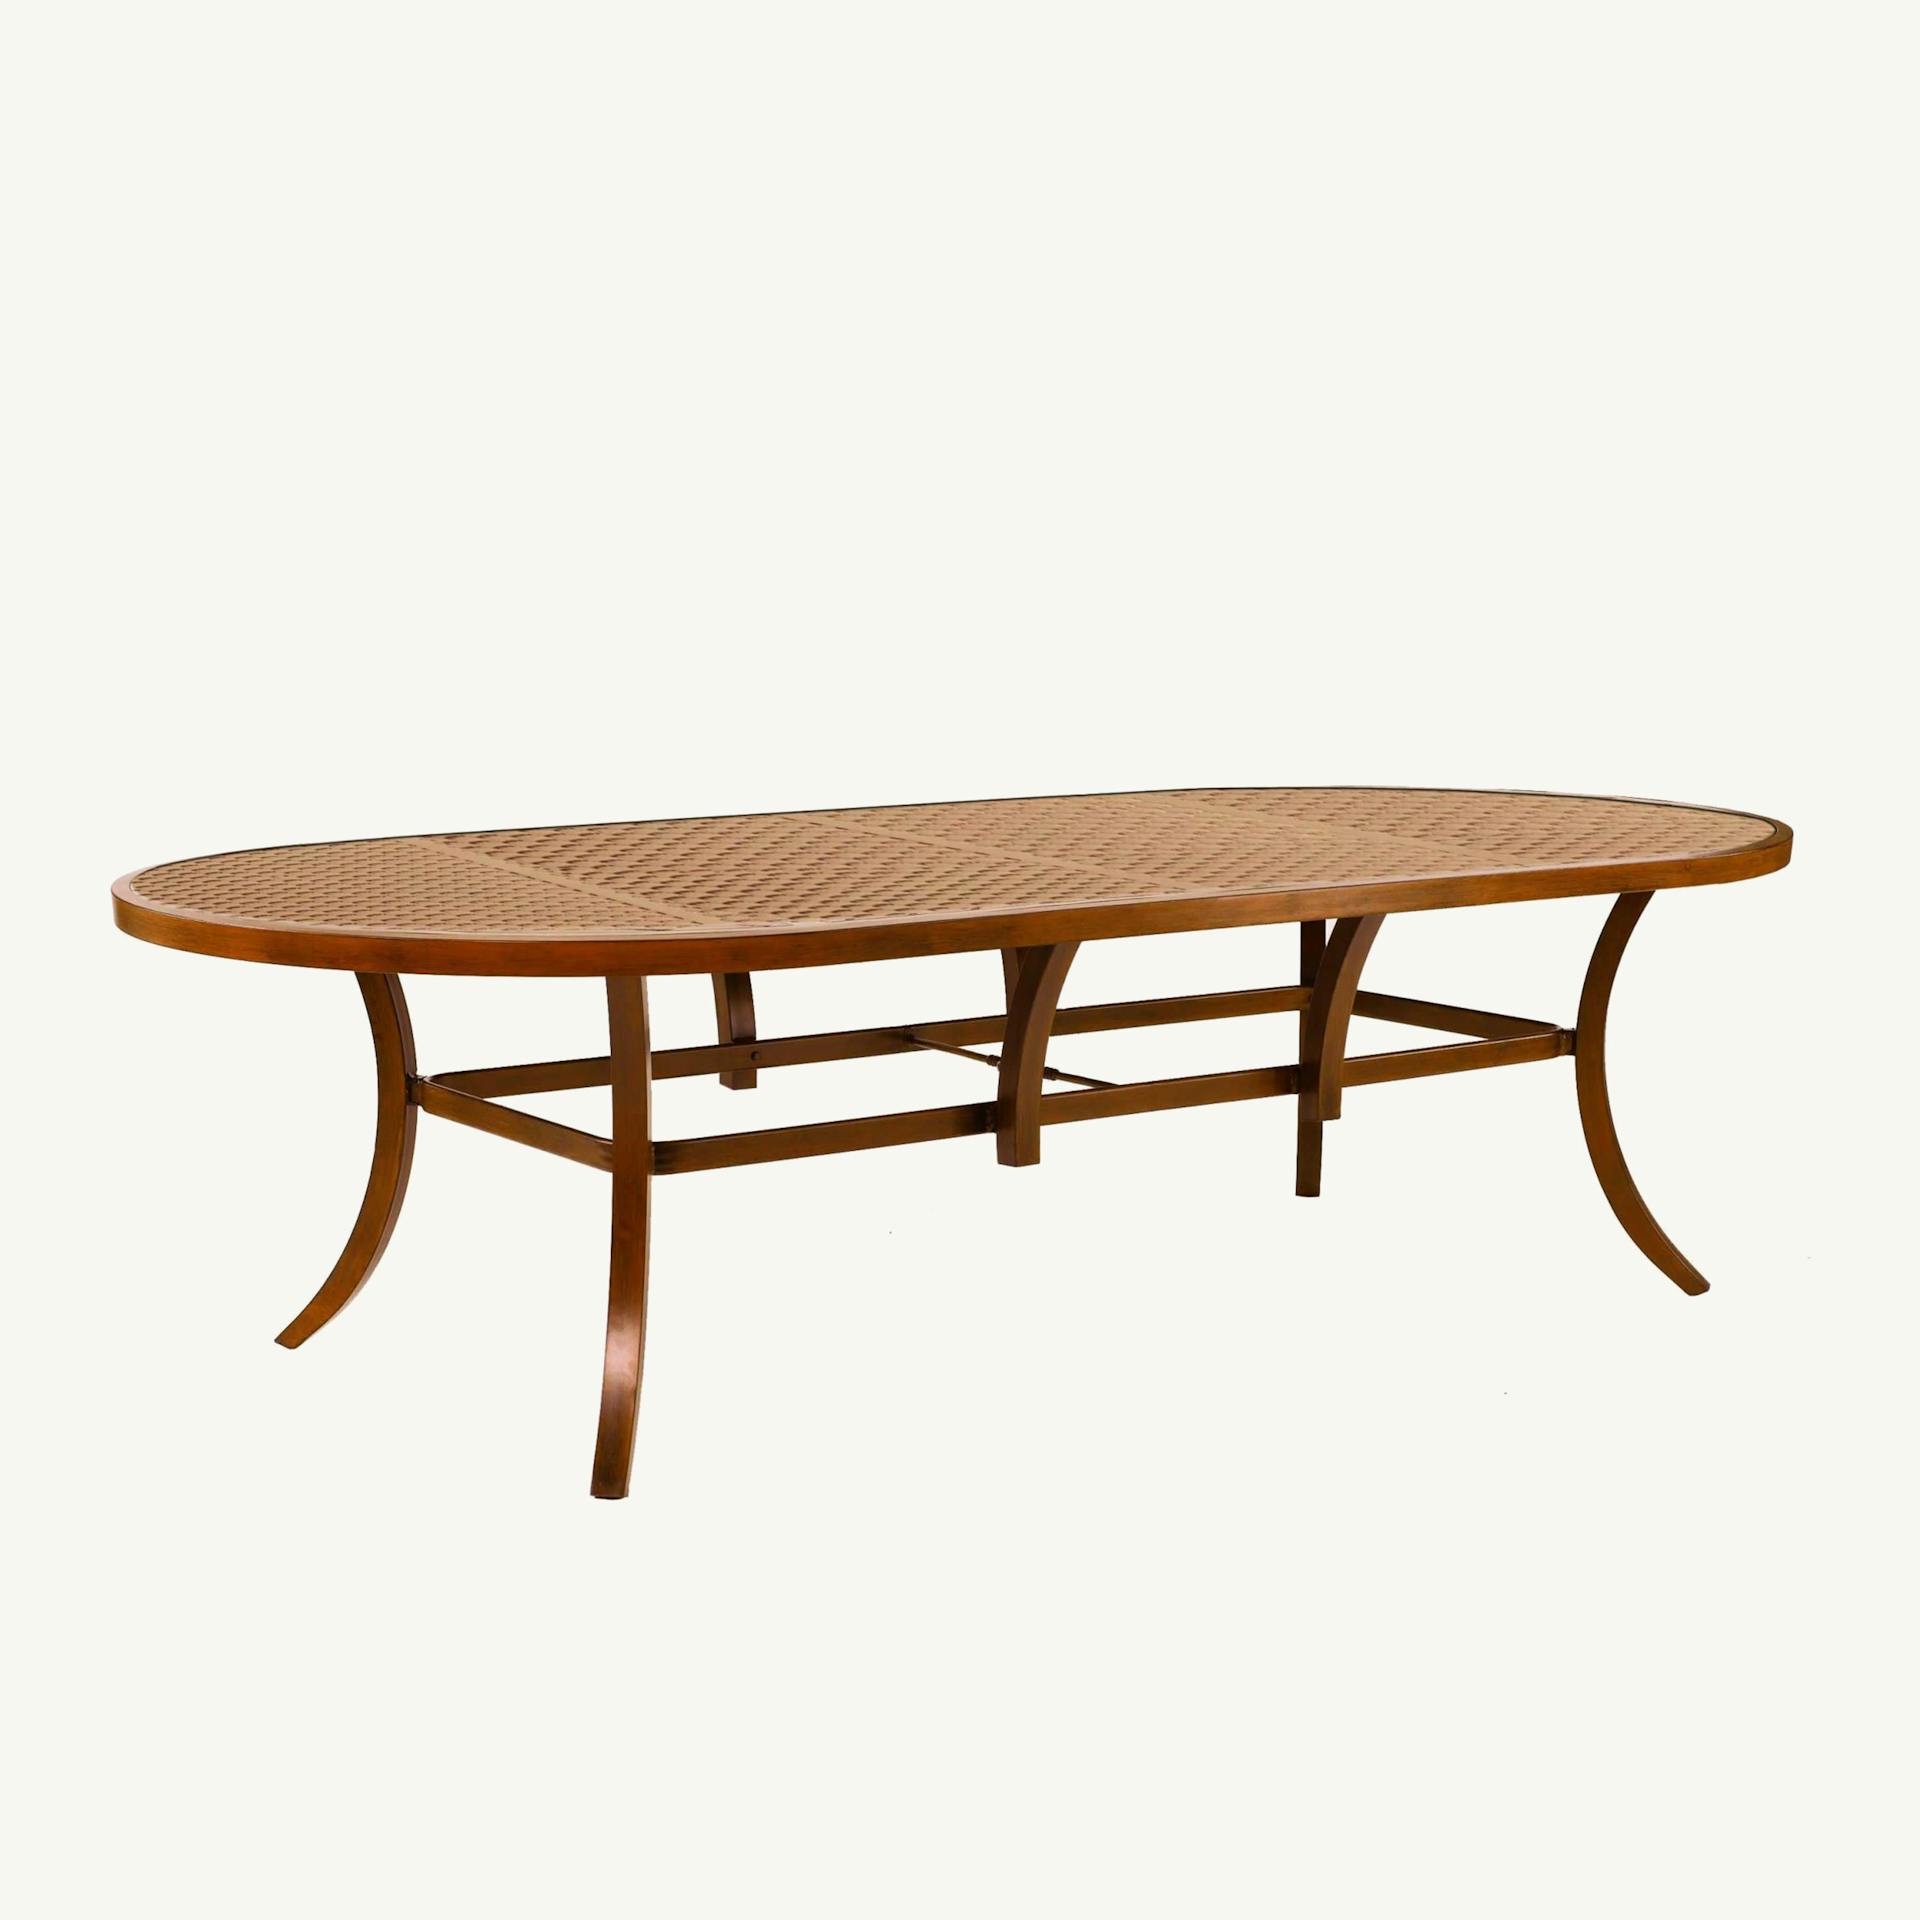 Classical 48" X 108" Oval Dining Table